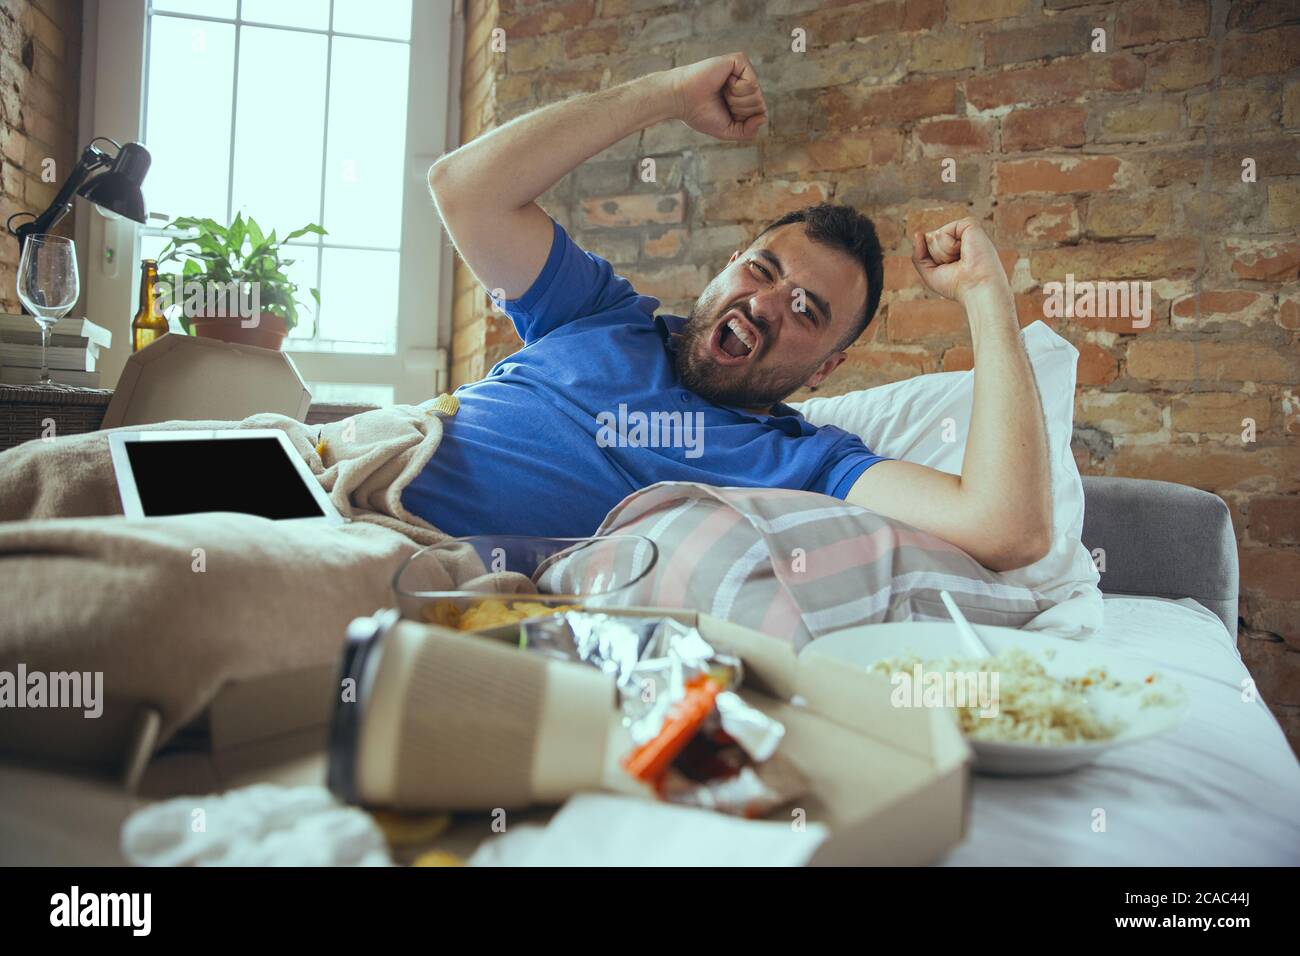 Celebrating, winner. Lazy caucasian man living in his bed surrounded with messy. No need to go out to be happy. Using gadgets, watching movie and series, social media, looks emotional. Home lifestyle. Stock Photo